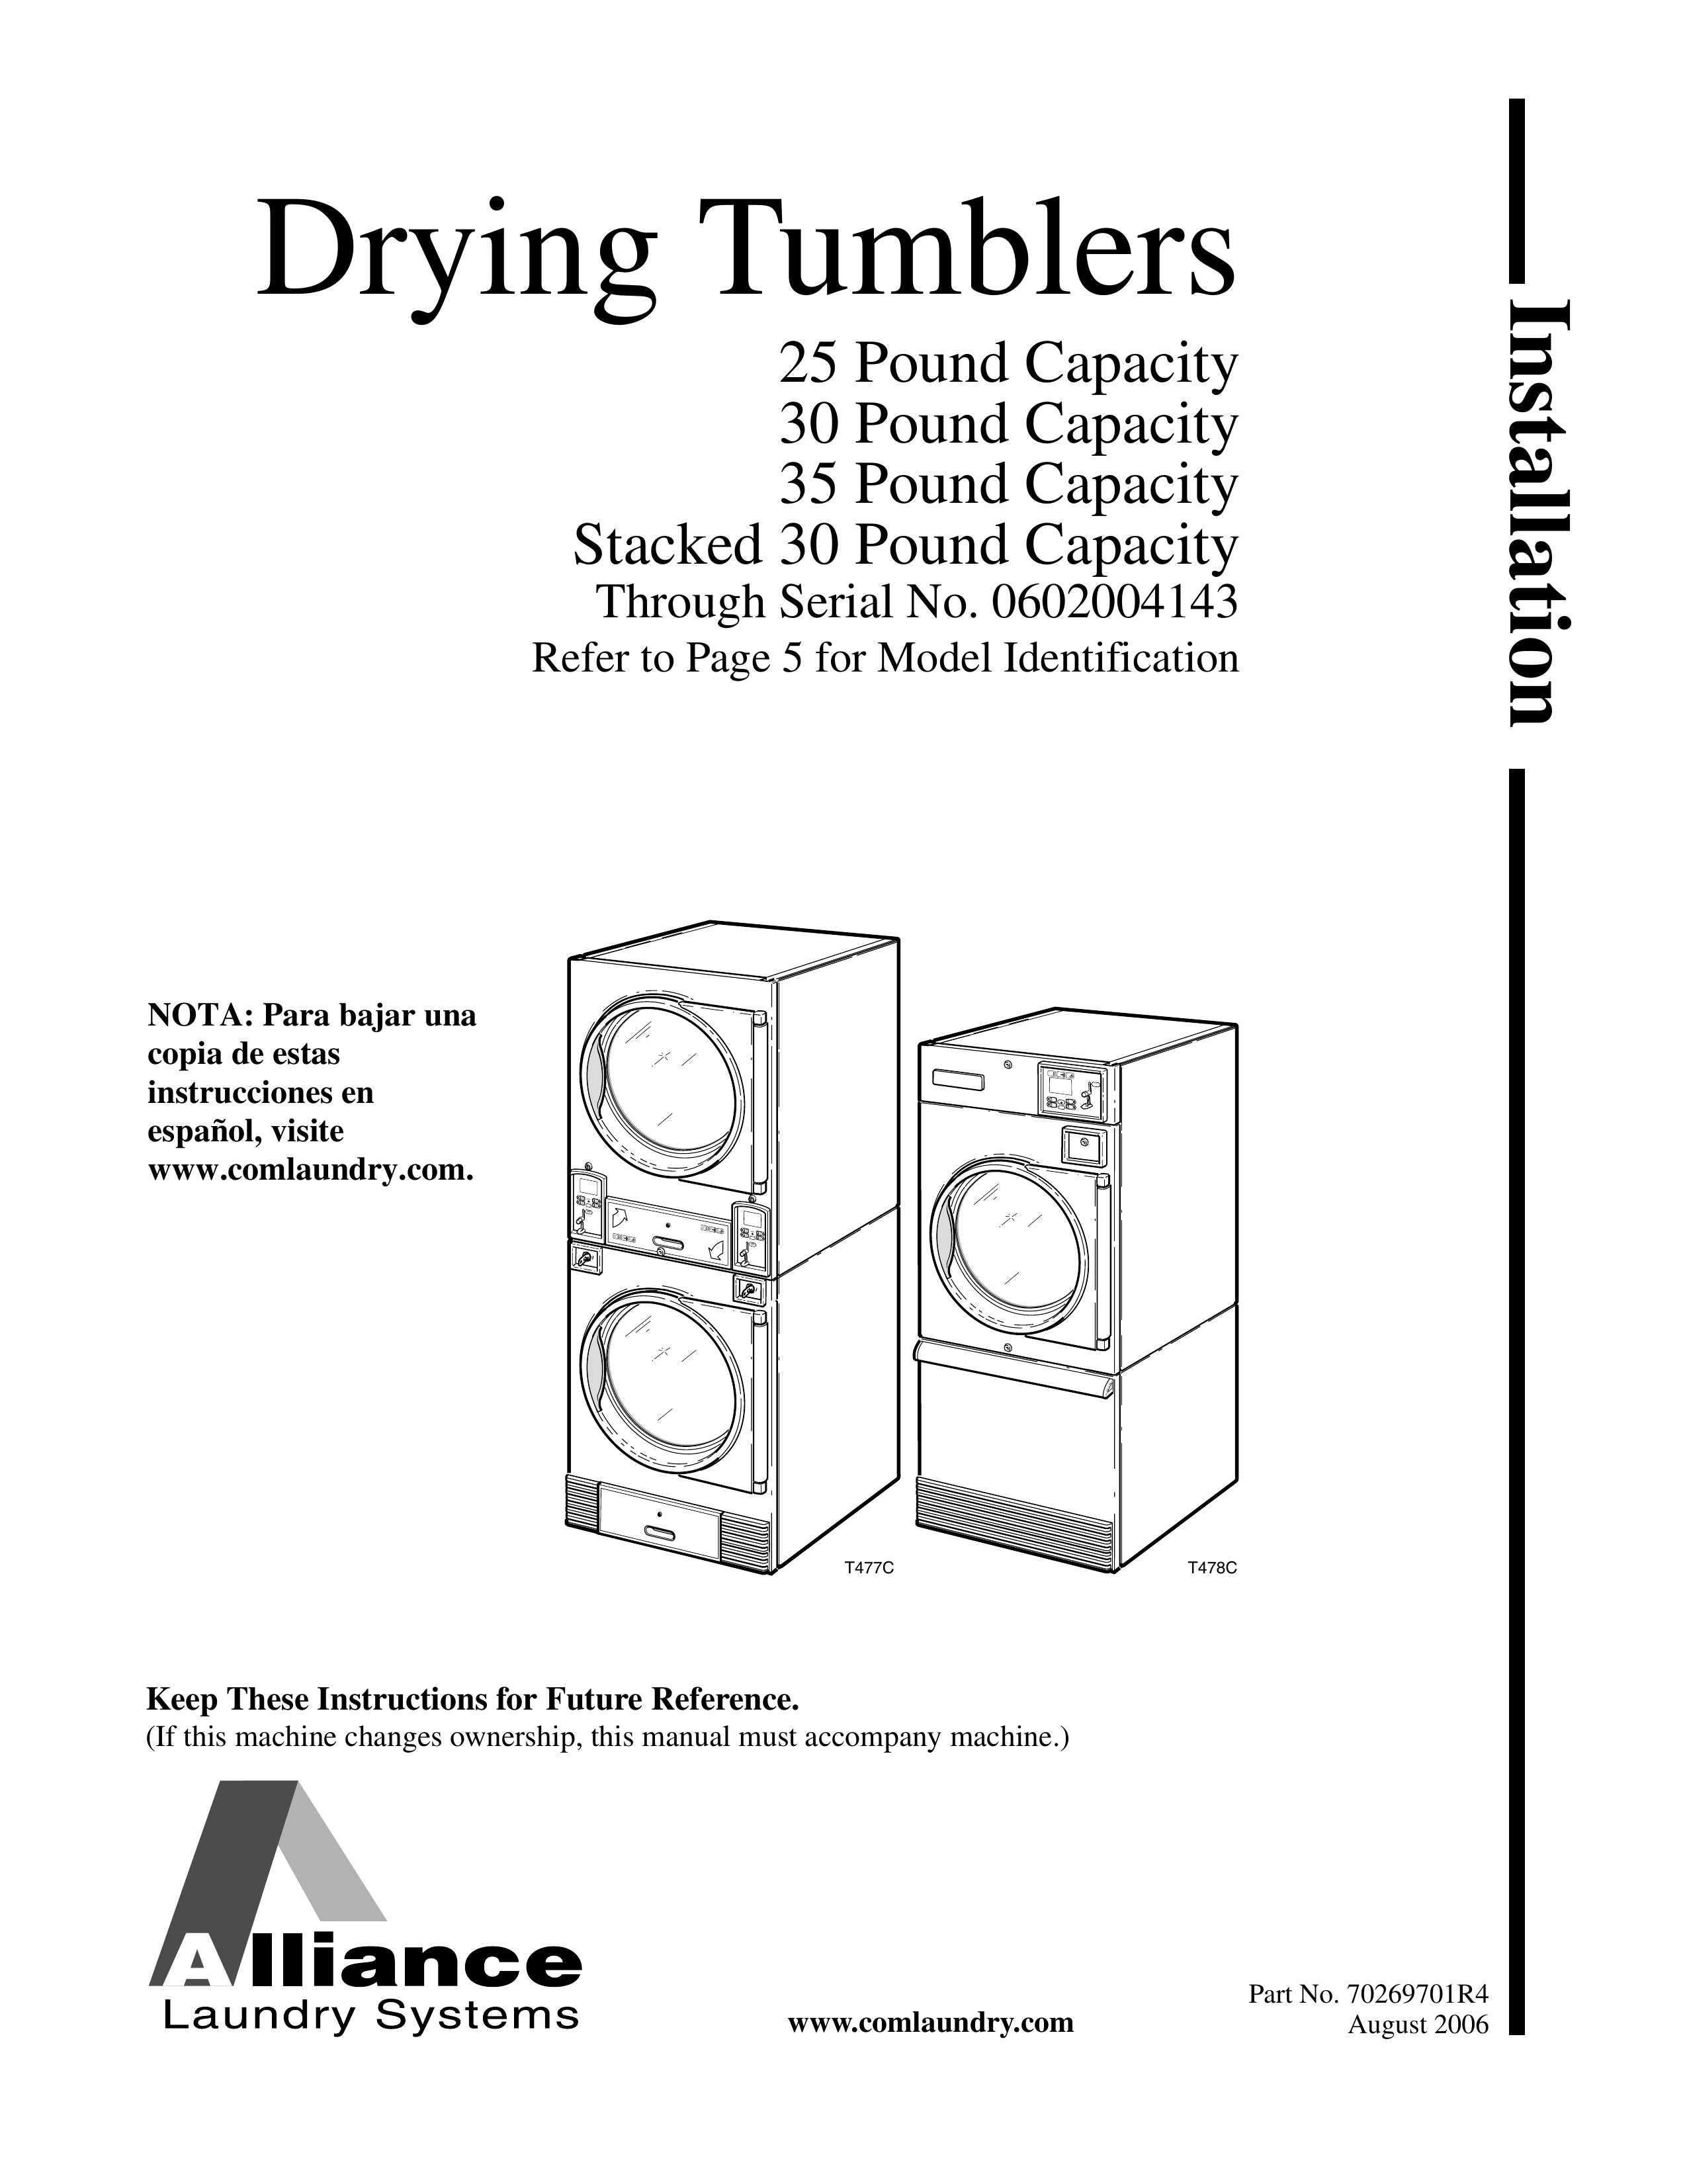 Alliance Laundry Systems 70269701R4 Clothes Dryer User Manual